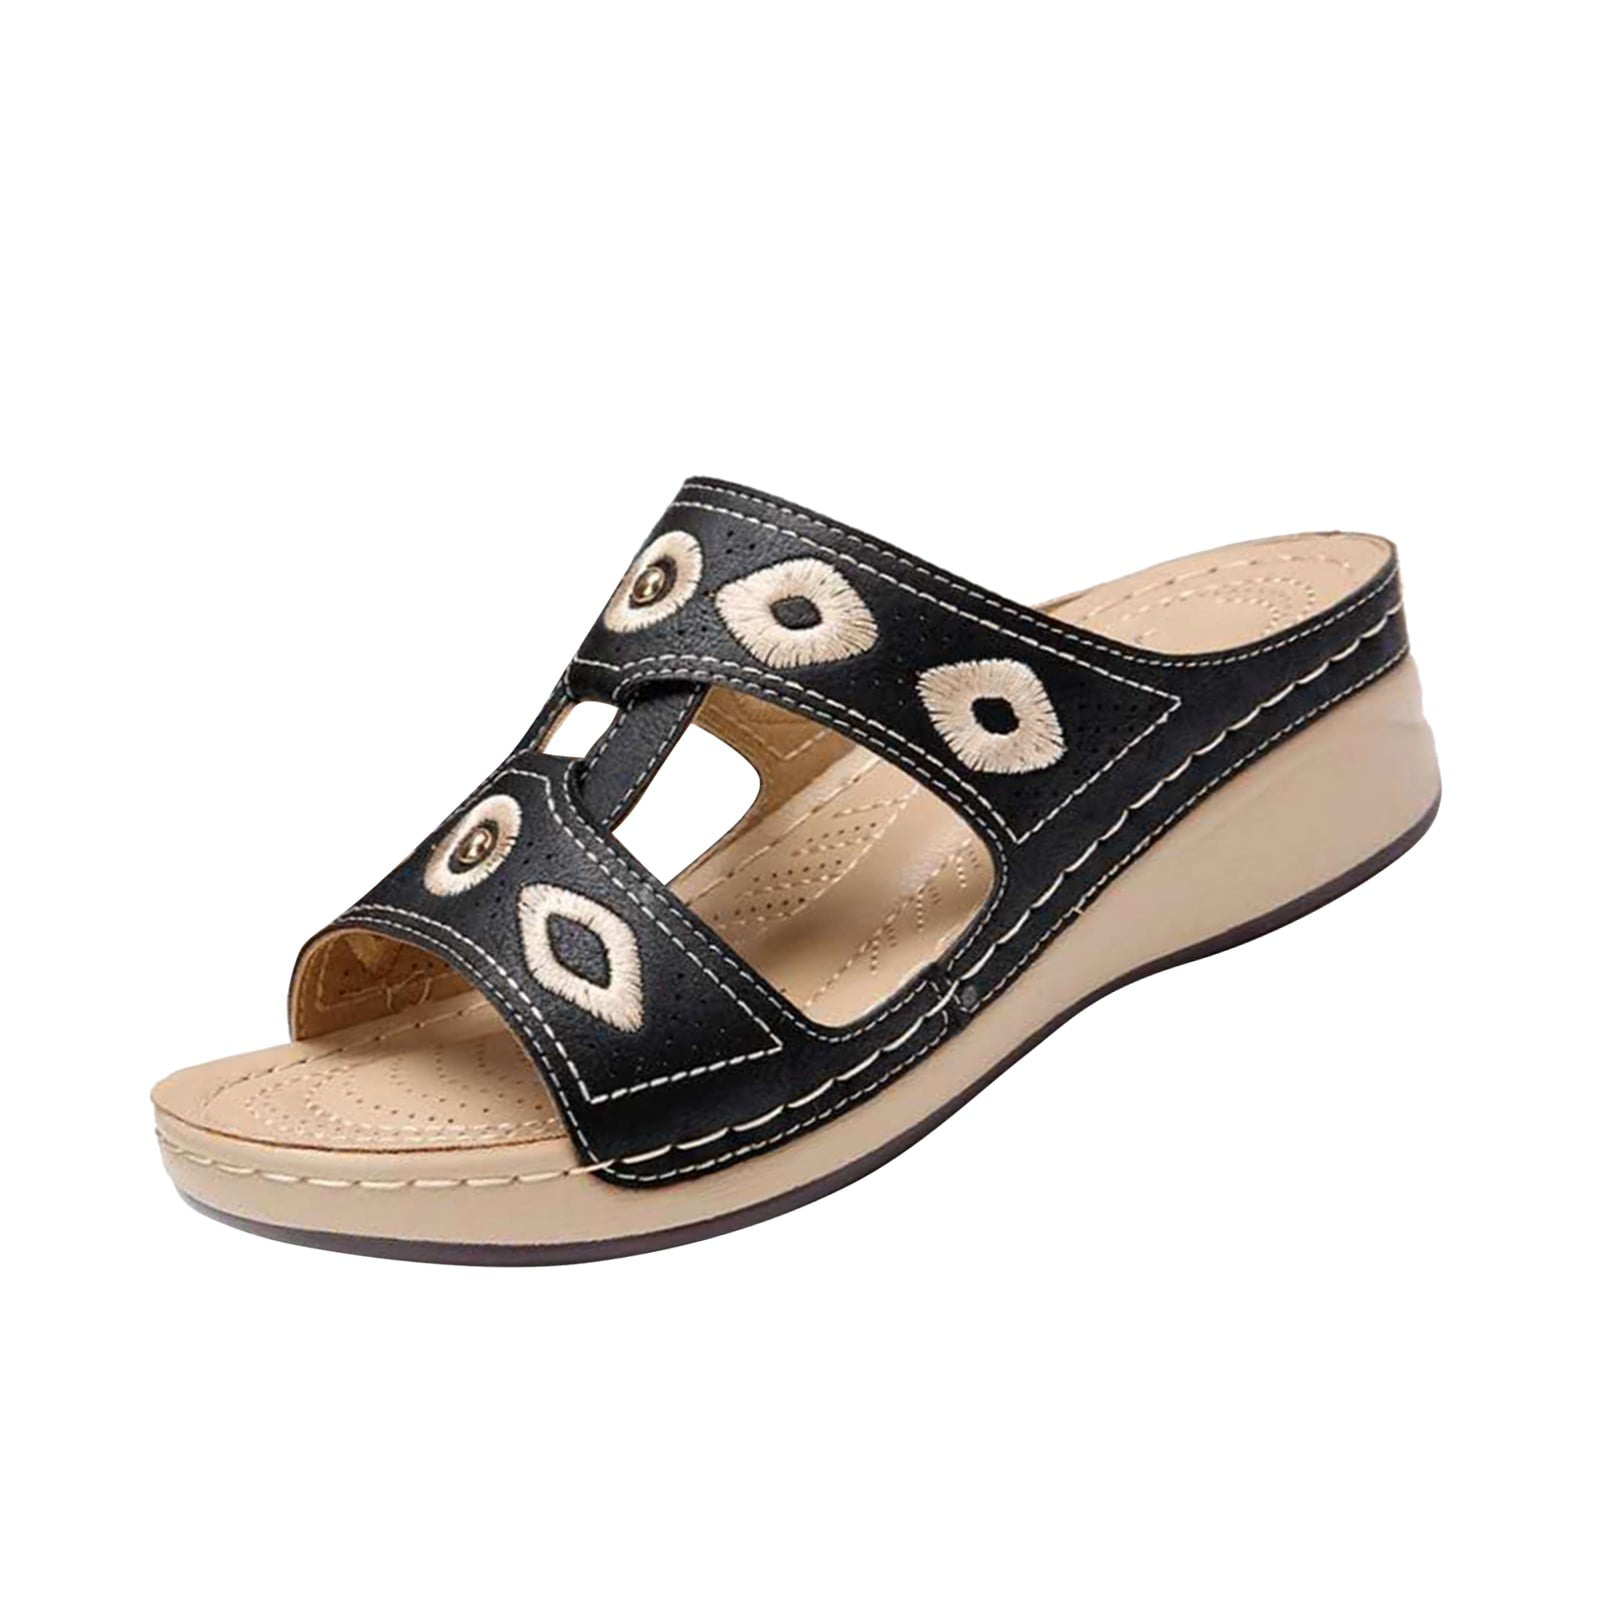 Ichuanyi Clearance Women Sandals Women Shoes Sexy Metal Chain With Thin ...